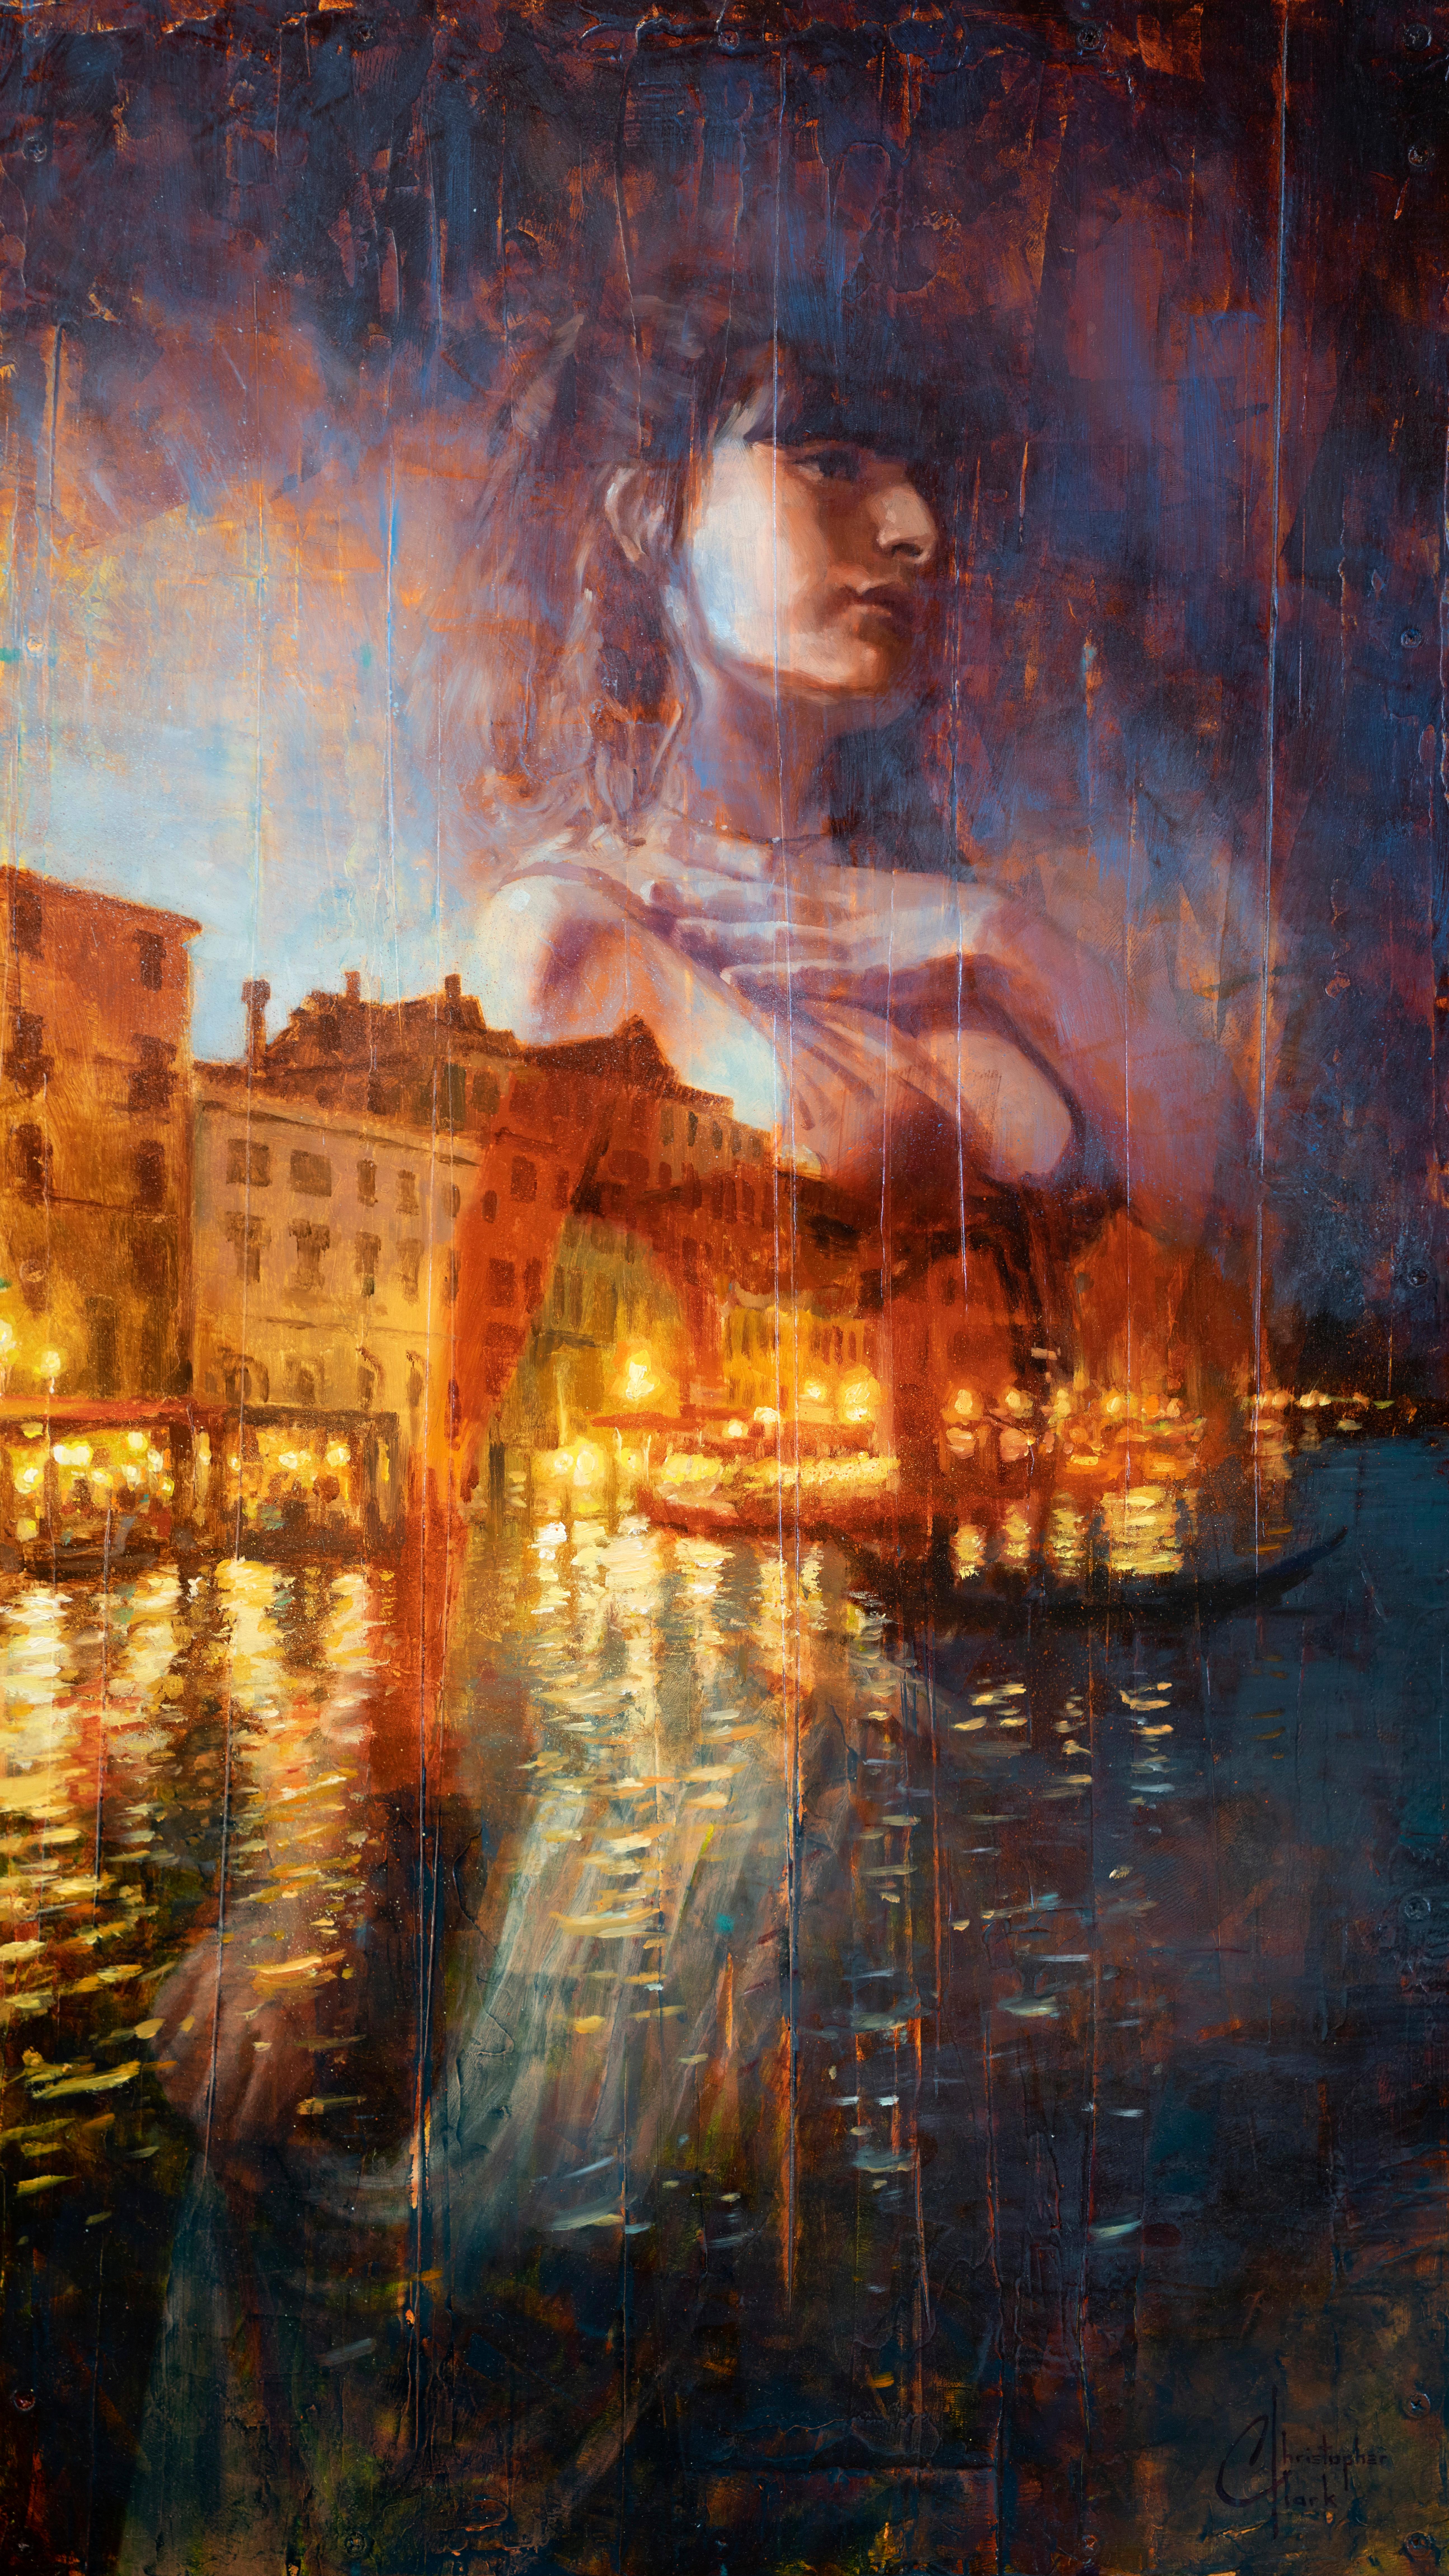 Christopher Clark Portrait Painting - "Daydream" Oil Painting